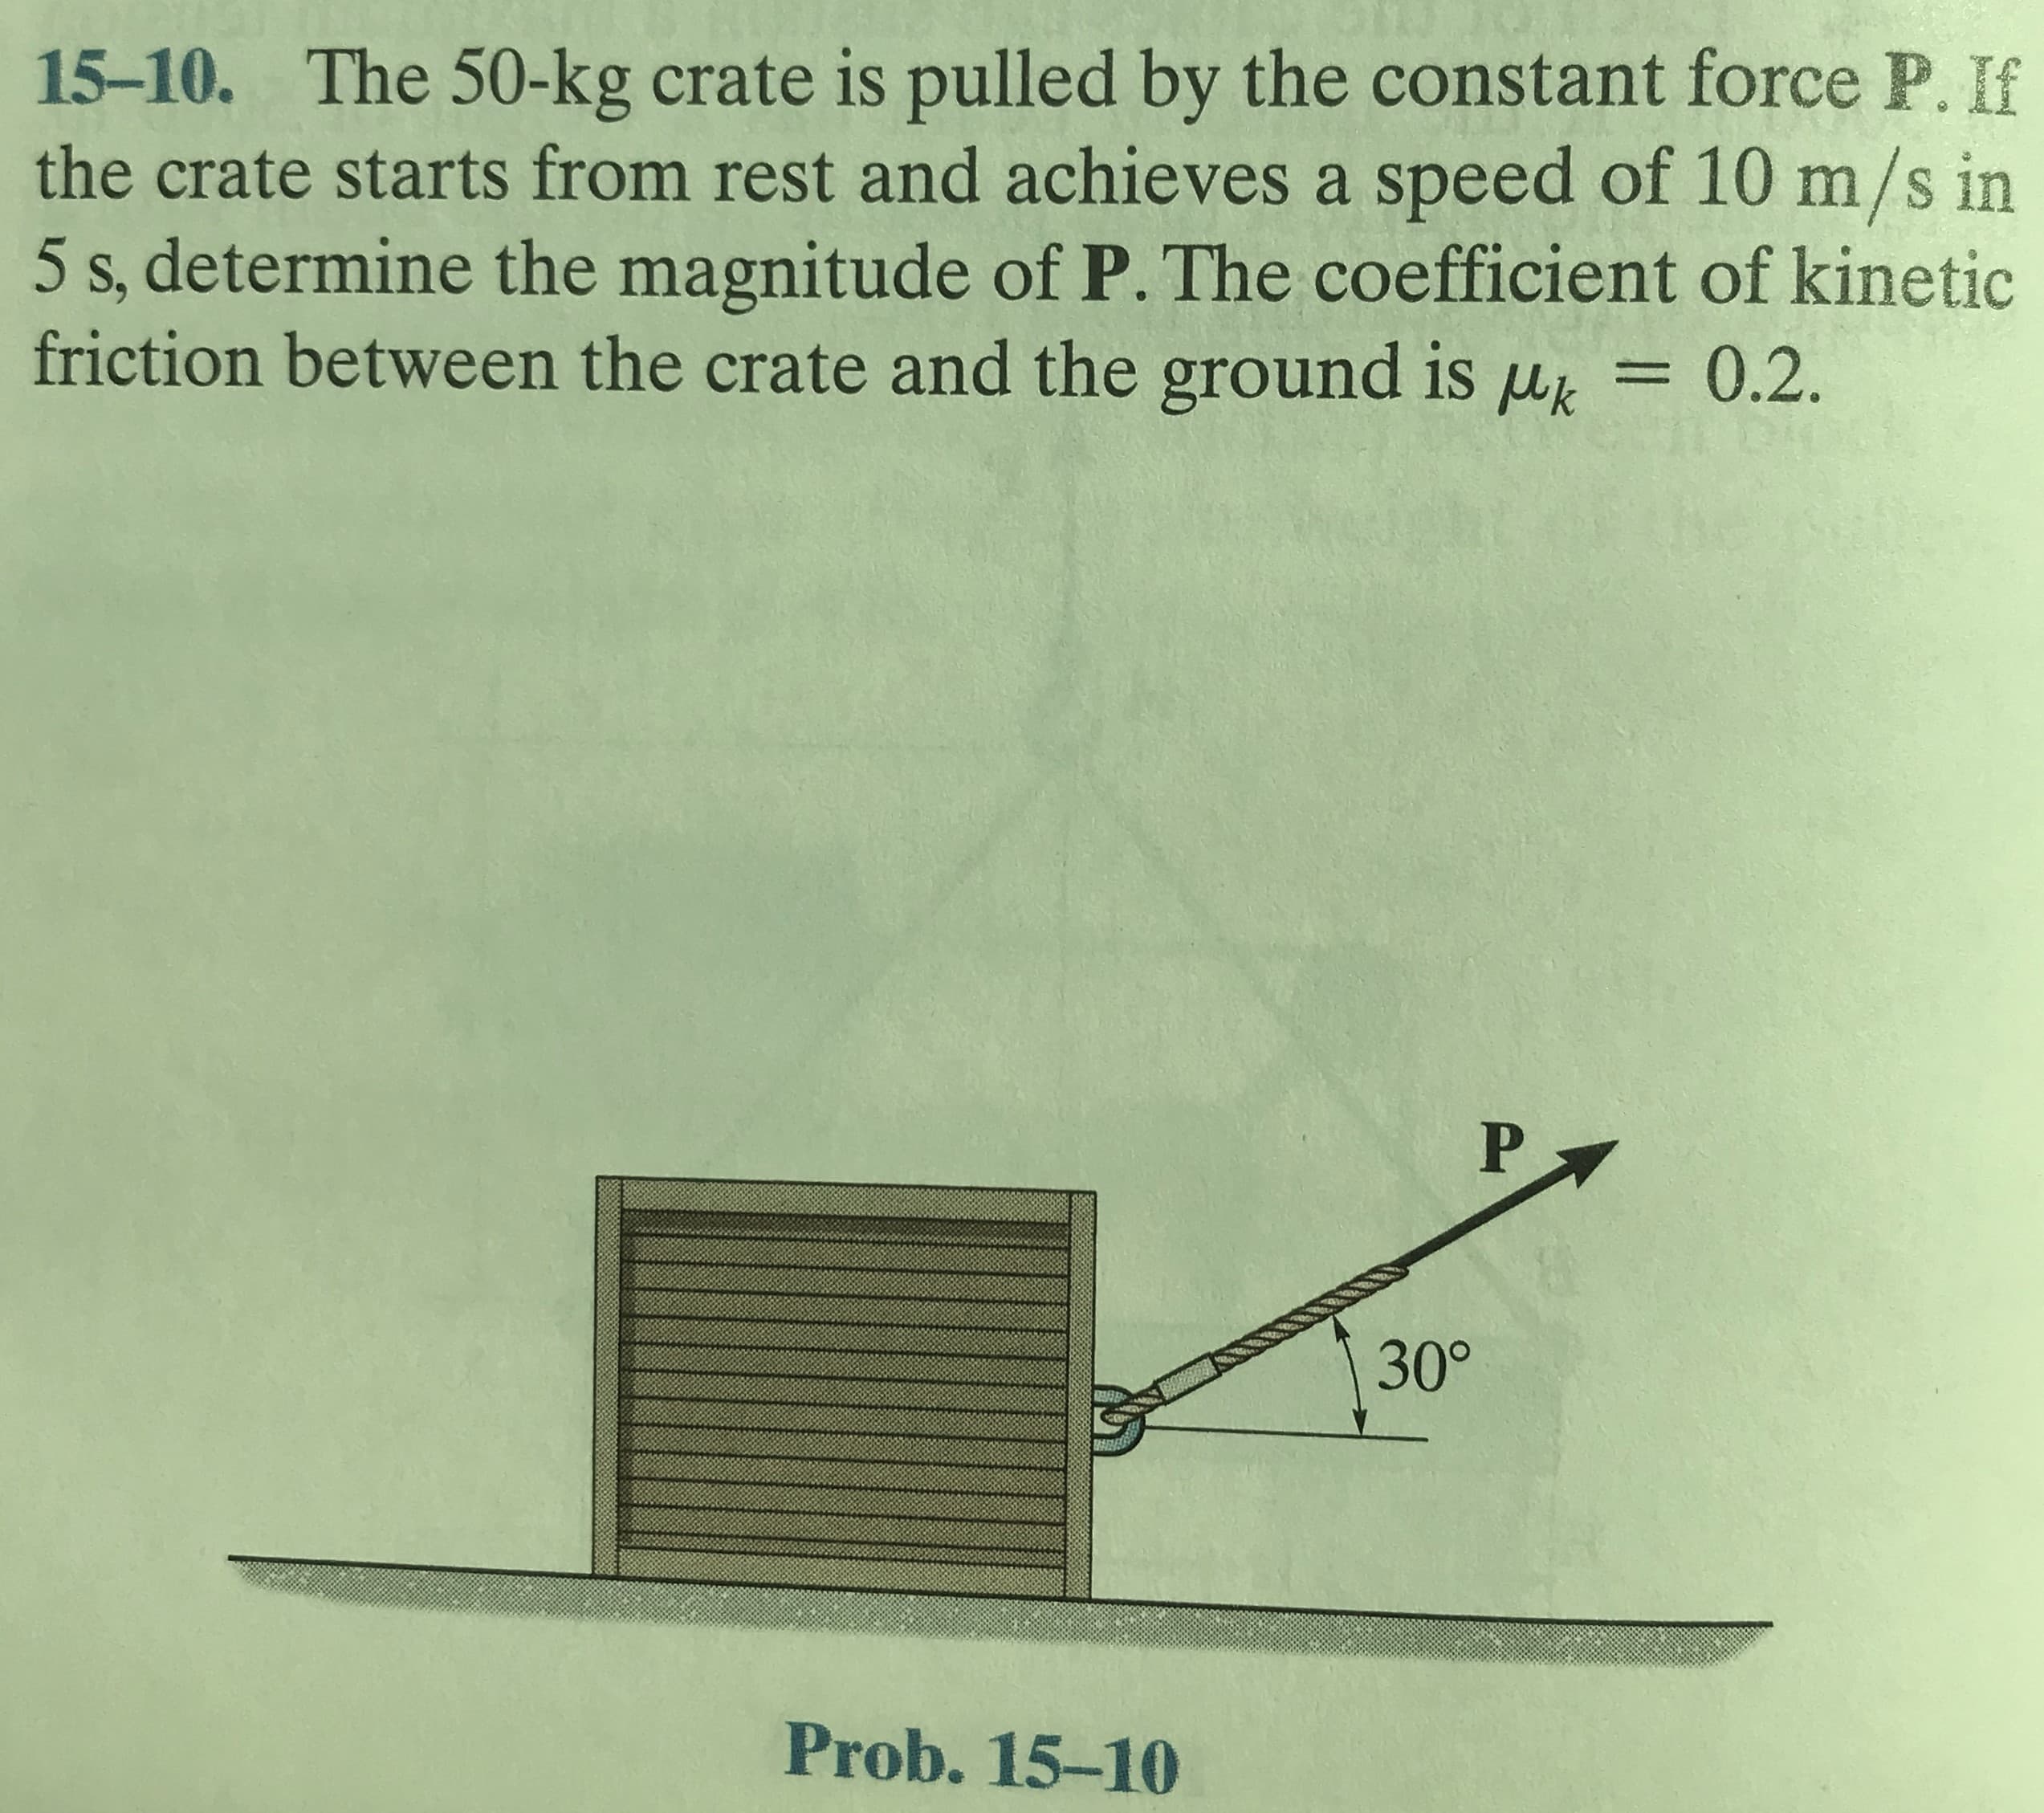 15-10. The 50-kg crate is pulled by the constant force P. If
the crate starts from rest and achieves a speed of 10 m/s in
5 s, determine the magnitude of P. The coefficient of kinetic
friction between the crate and the ground is uk
0.2.
%3D
P
30°
Prob. 15-10
